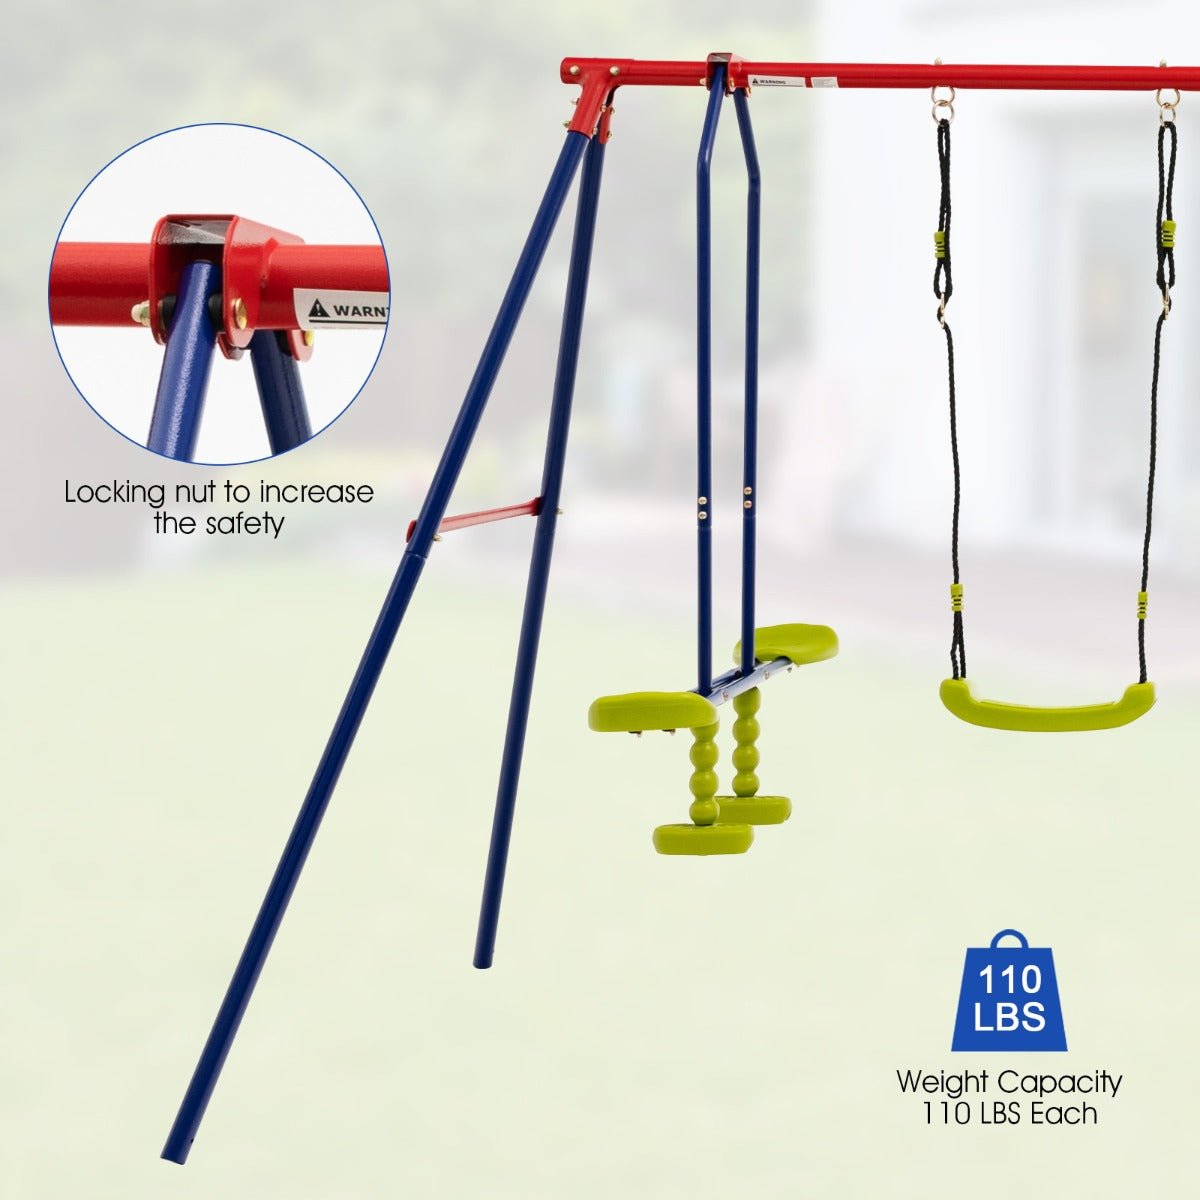 7-in-1 Swing Set with Ground Stakes: Create Memories Outdoors